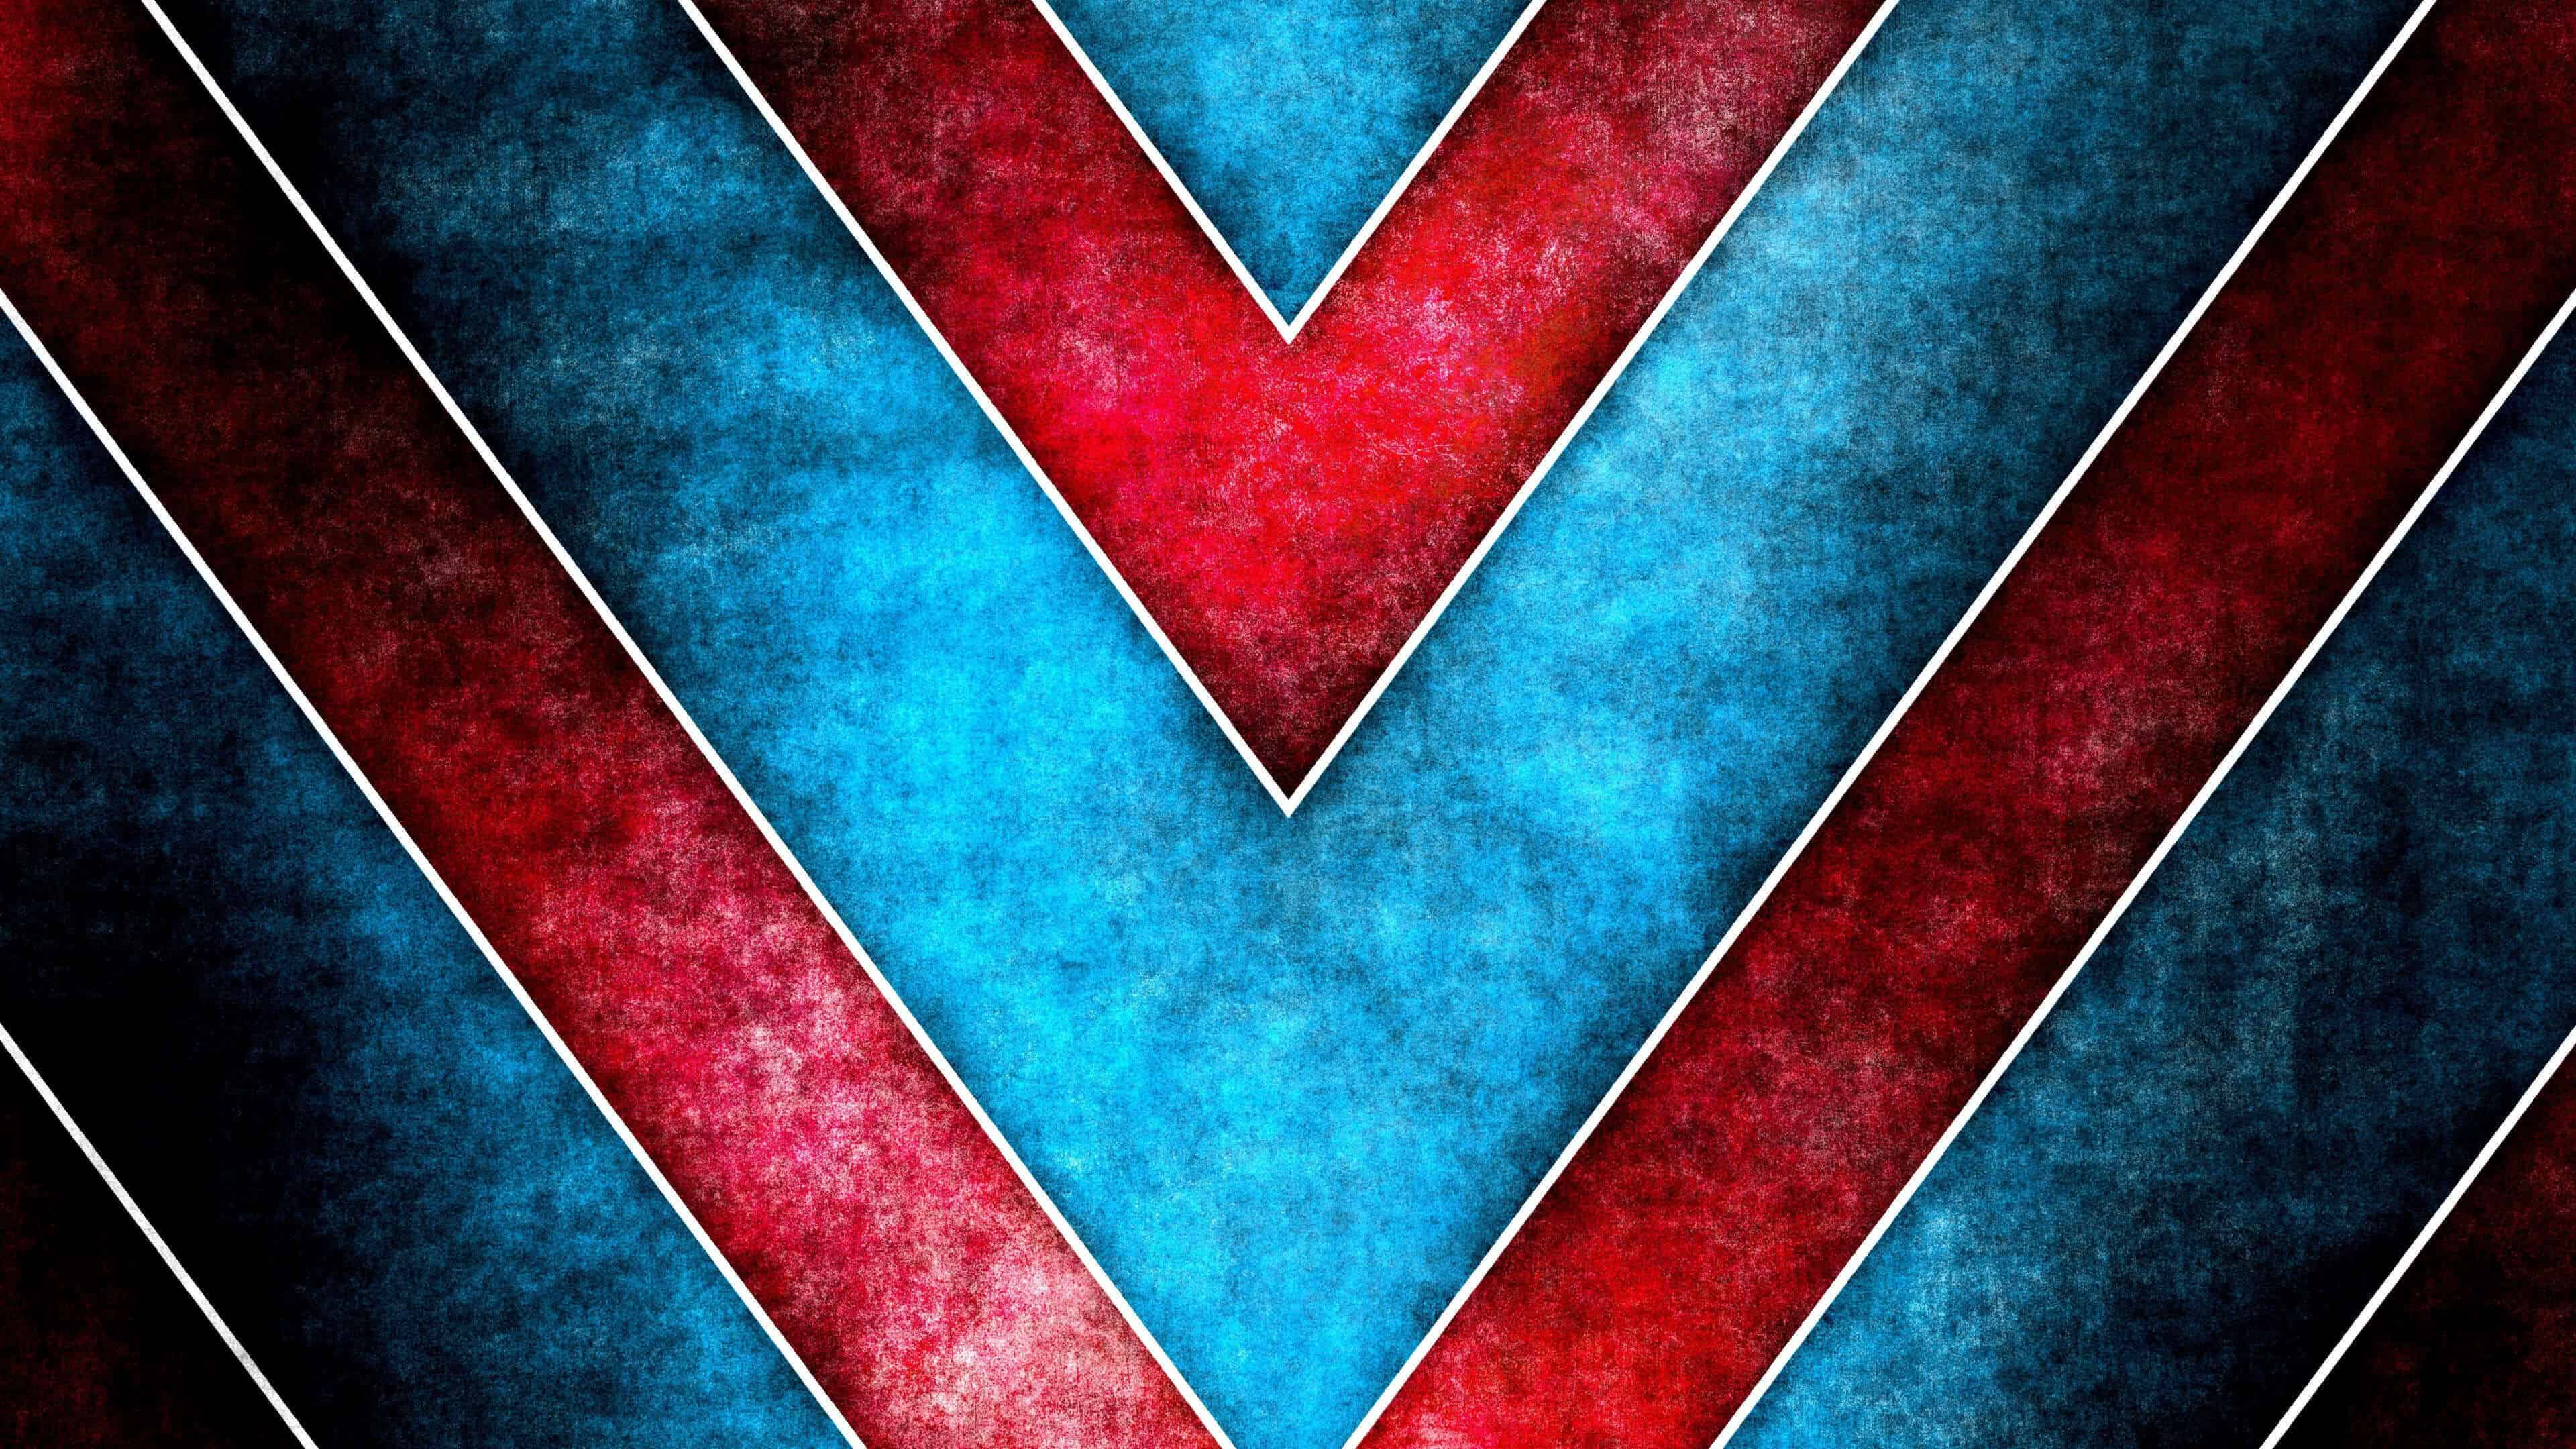 Red and Blue Triangle Logo - Red And Blue Triangle Pattern UHD 4K Wallpaper